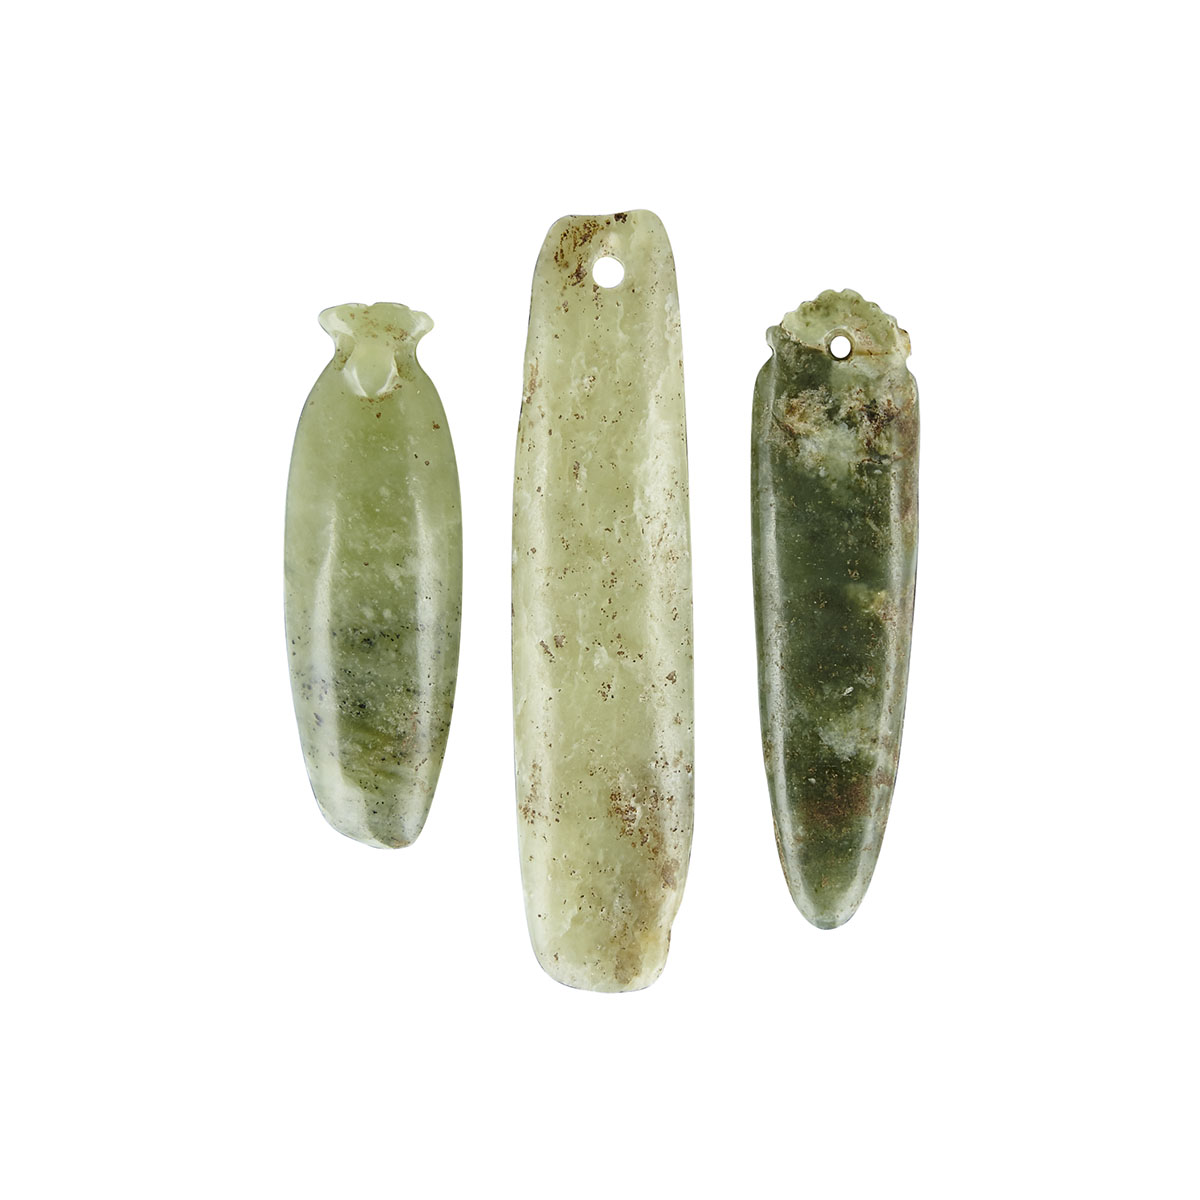 A Set of Three Ritual Jade Bars, Hongshan Culture, Neolithic Period or Later 